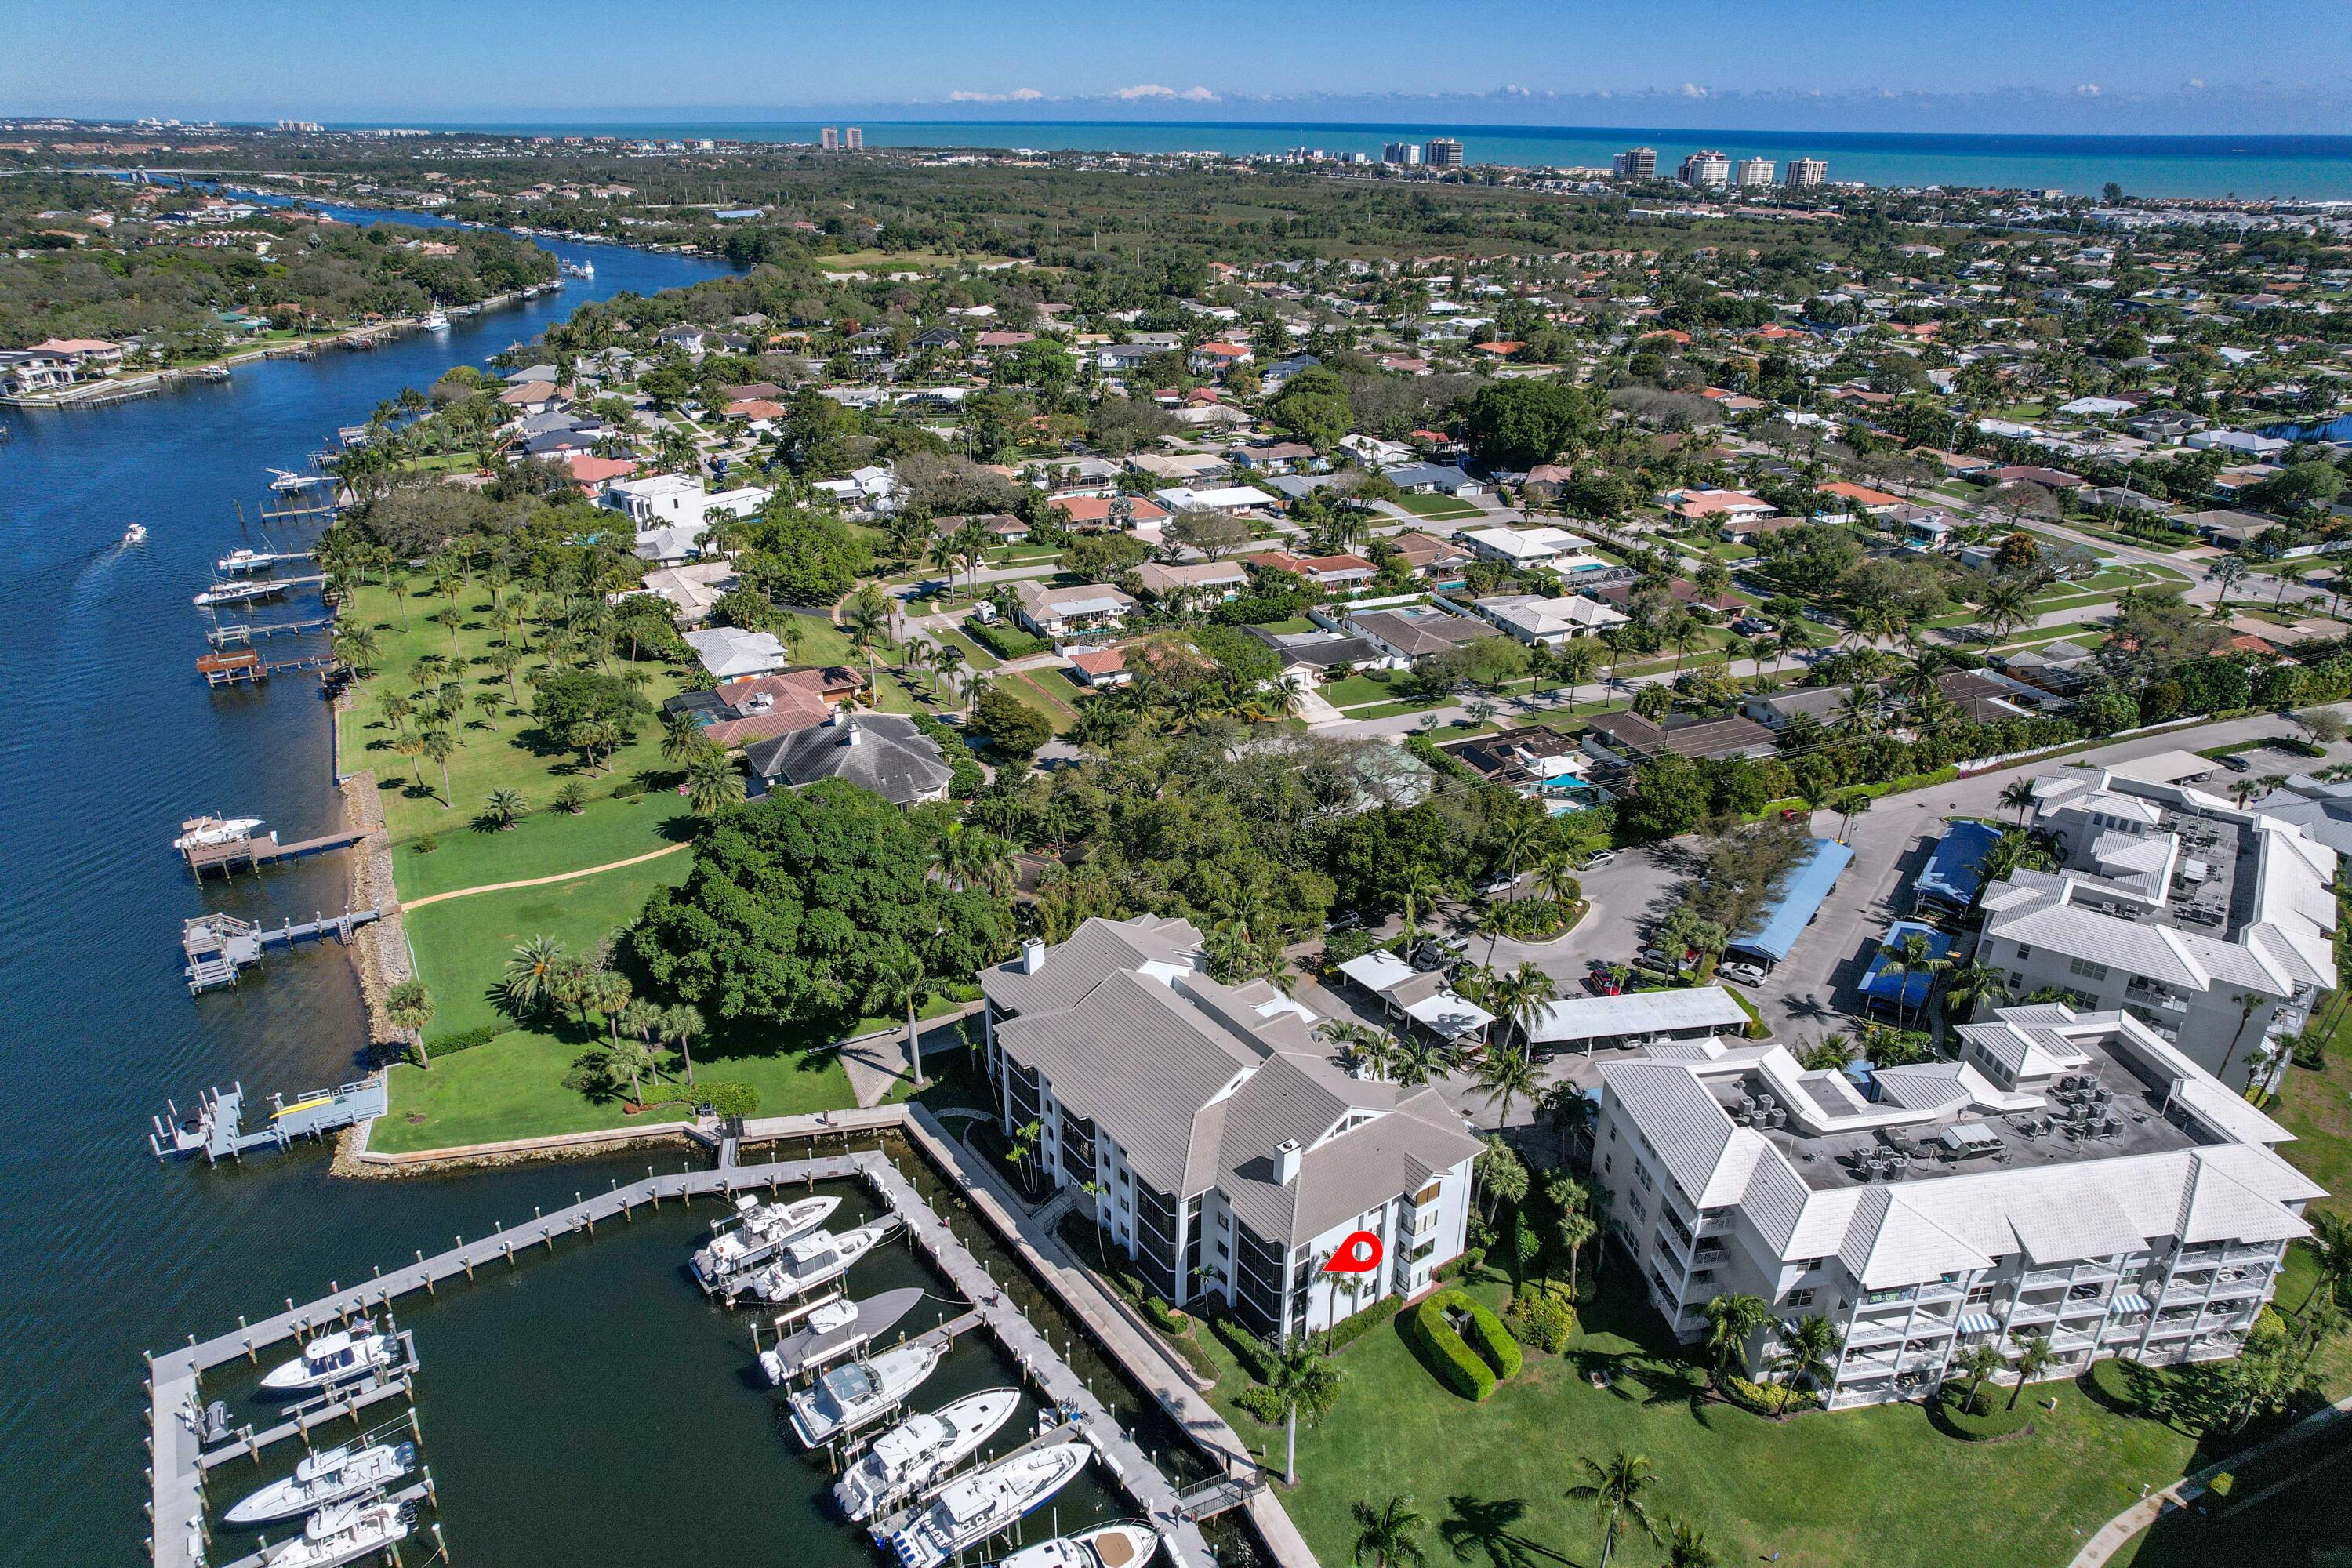 Discover coastal living at its finest! This Juno Beach condo offers 3 bedrooms, 2 bathrooms and 1600 square feet of living area. Located on the intracoastal, just minutes from the beach, this end unit offers breathtaking views. Enjoy a resort lifestyle with access to a fitness center, clubhouse, Pickleball, Tennis, Bocce, Firepit and a sparkling pool & spa. Experience the pinnacle of waterfront living with unparalleled amenities. Revel in the seamless flow of tile flooring throughout, complemented by the southern exposure bathing the end unit in natural light. The custom kitchen cabinetry adds a touch of sophistication, while plantation shutters grace every window, providing both style and privacy. Your dream coastal home awaits. Boat Slips avail for purchase or lease.